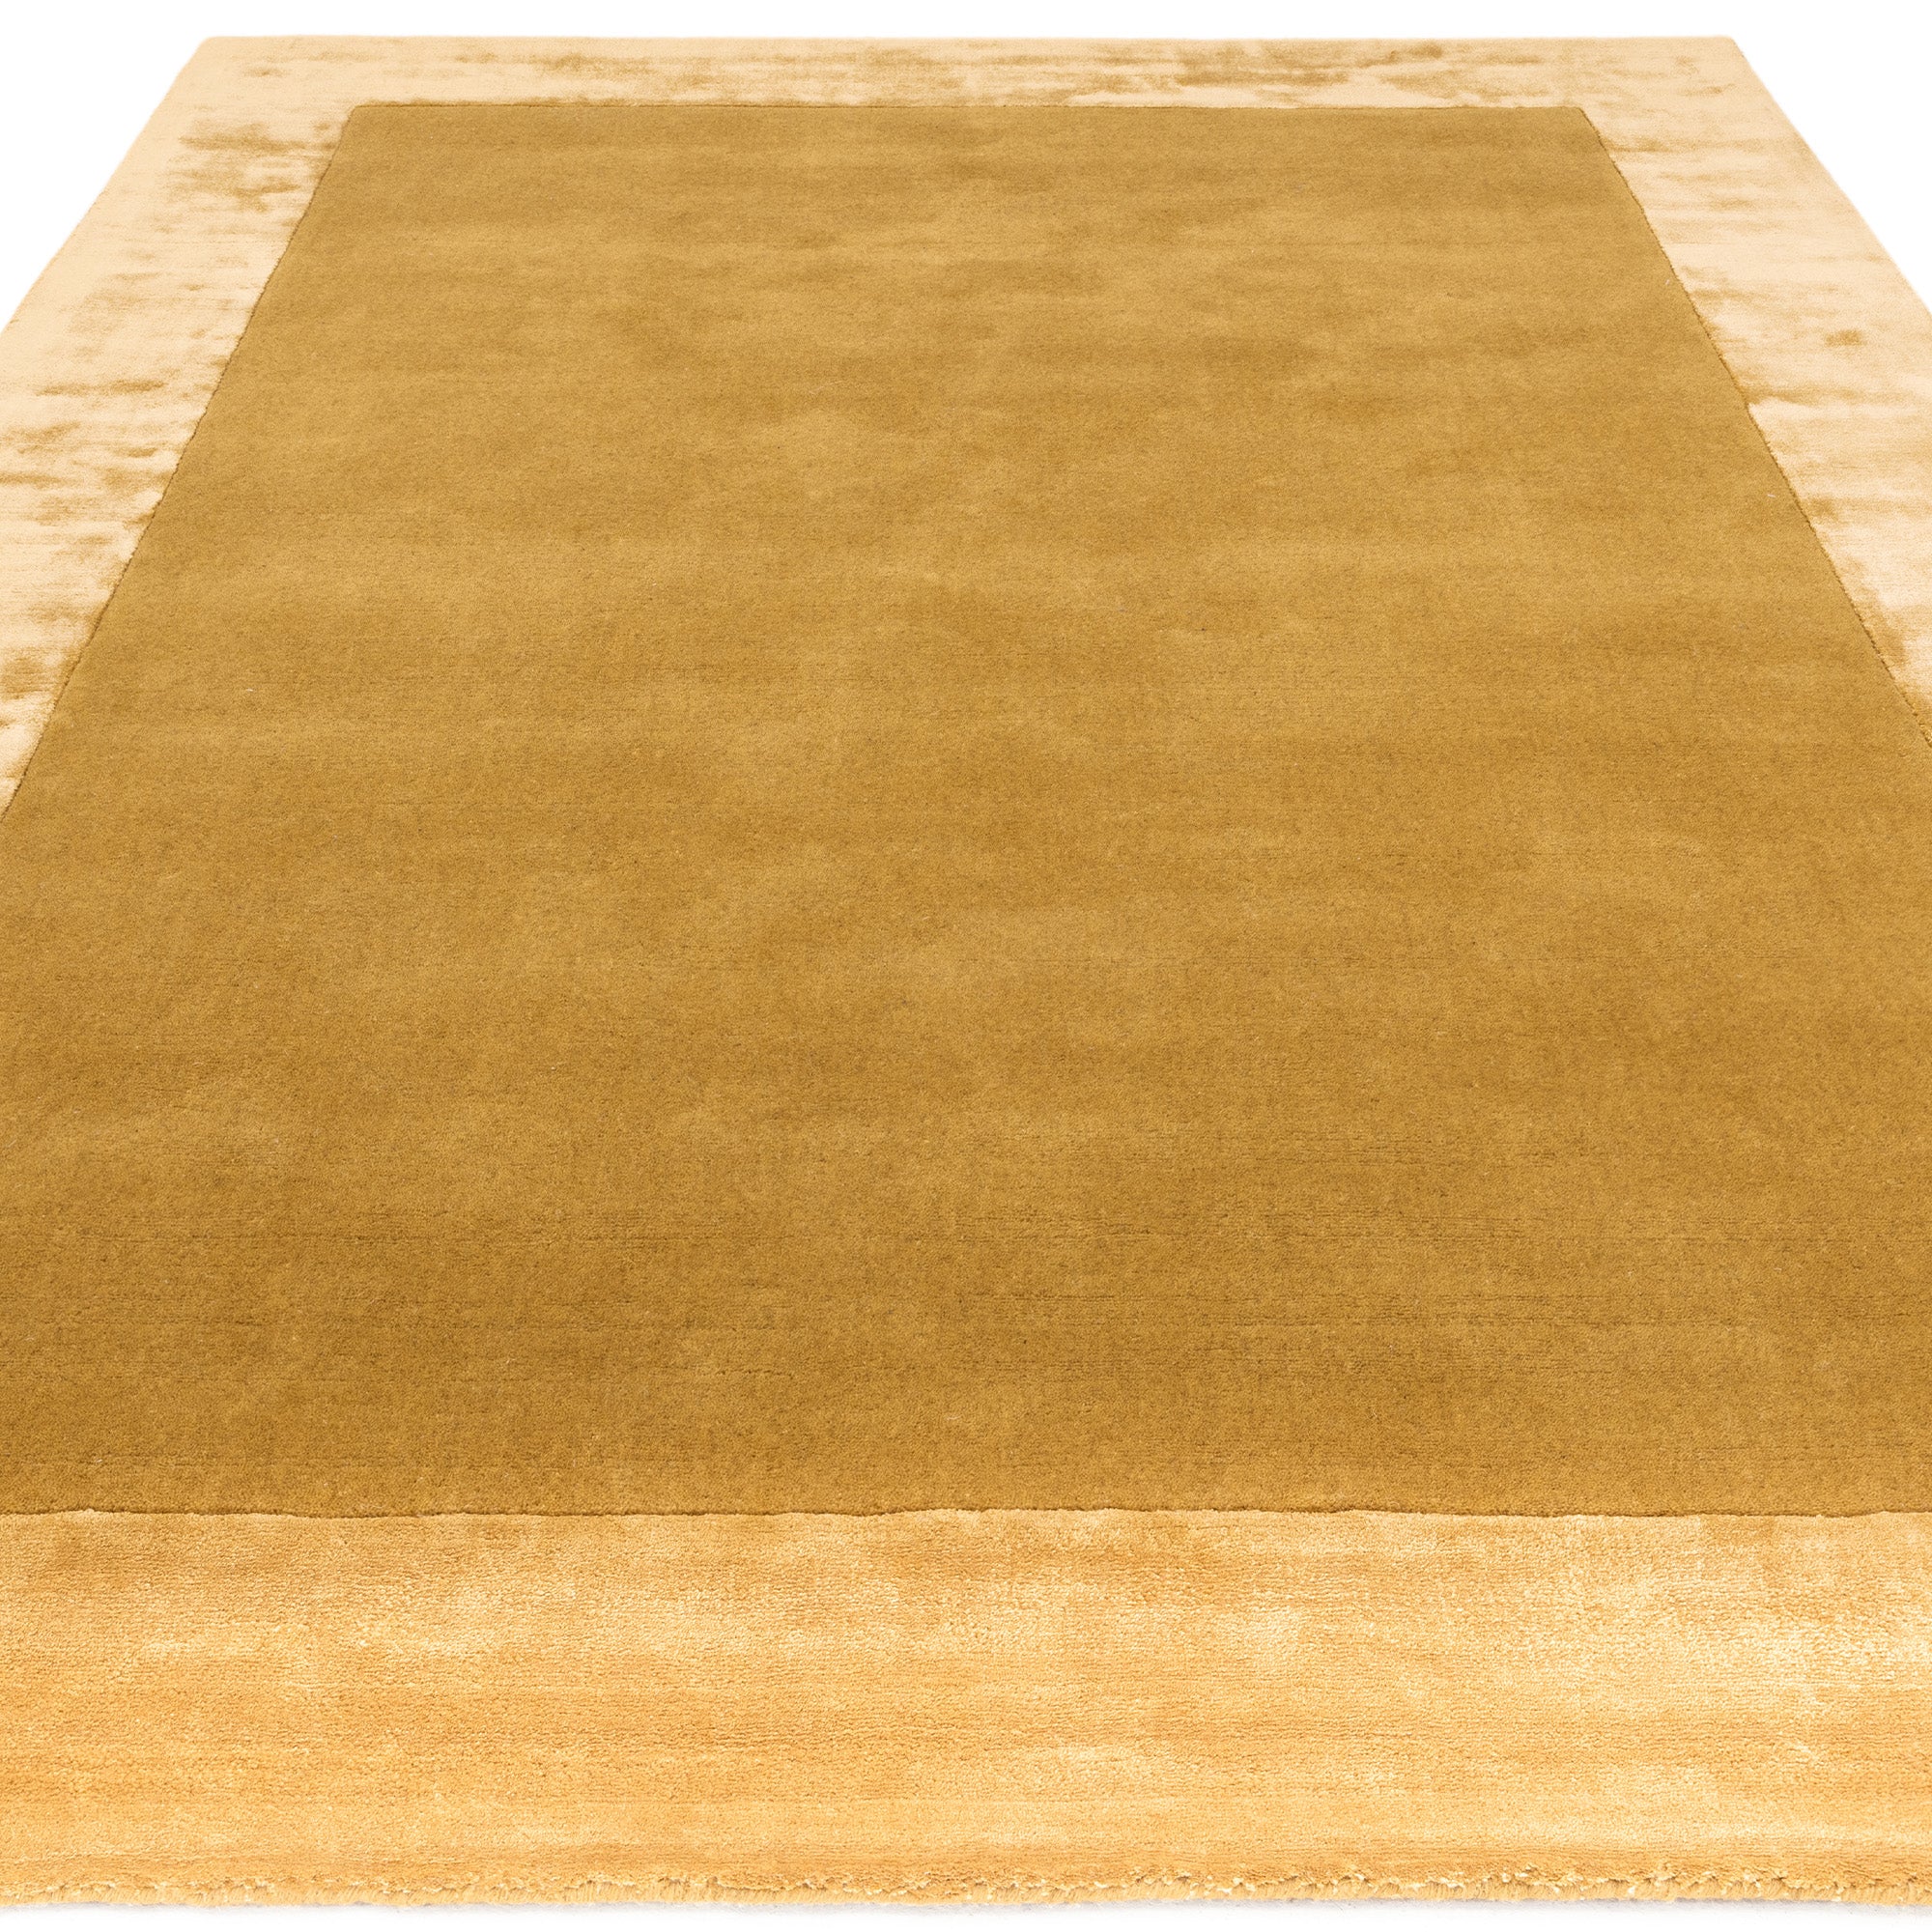 Gold wool and viscose rug with a border design